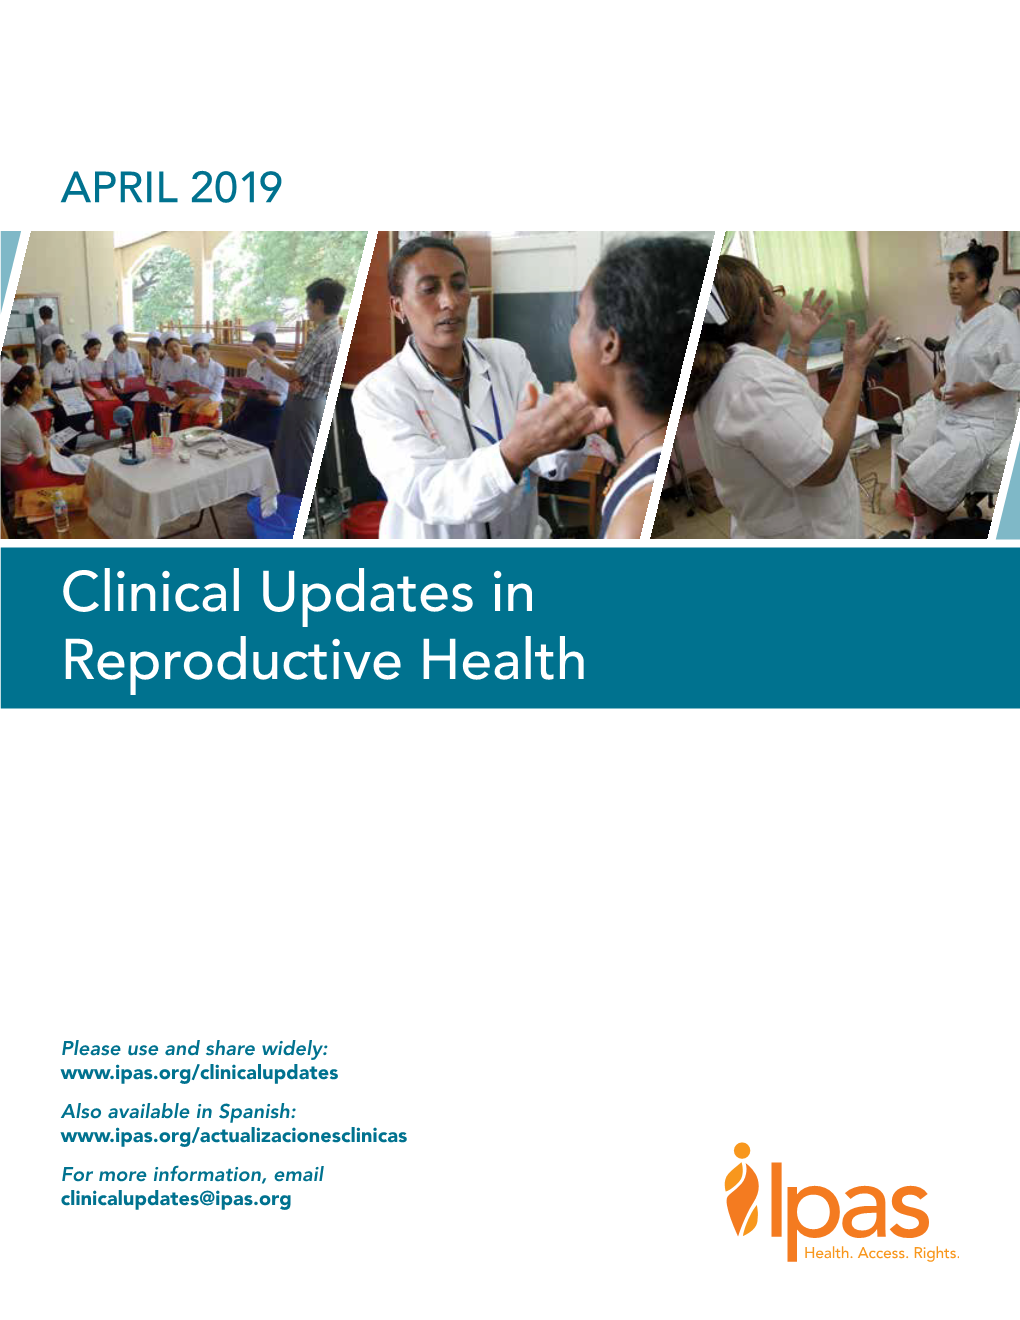 Clinical Updates in Reproductive Health